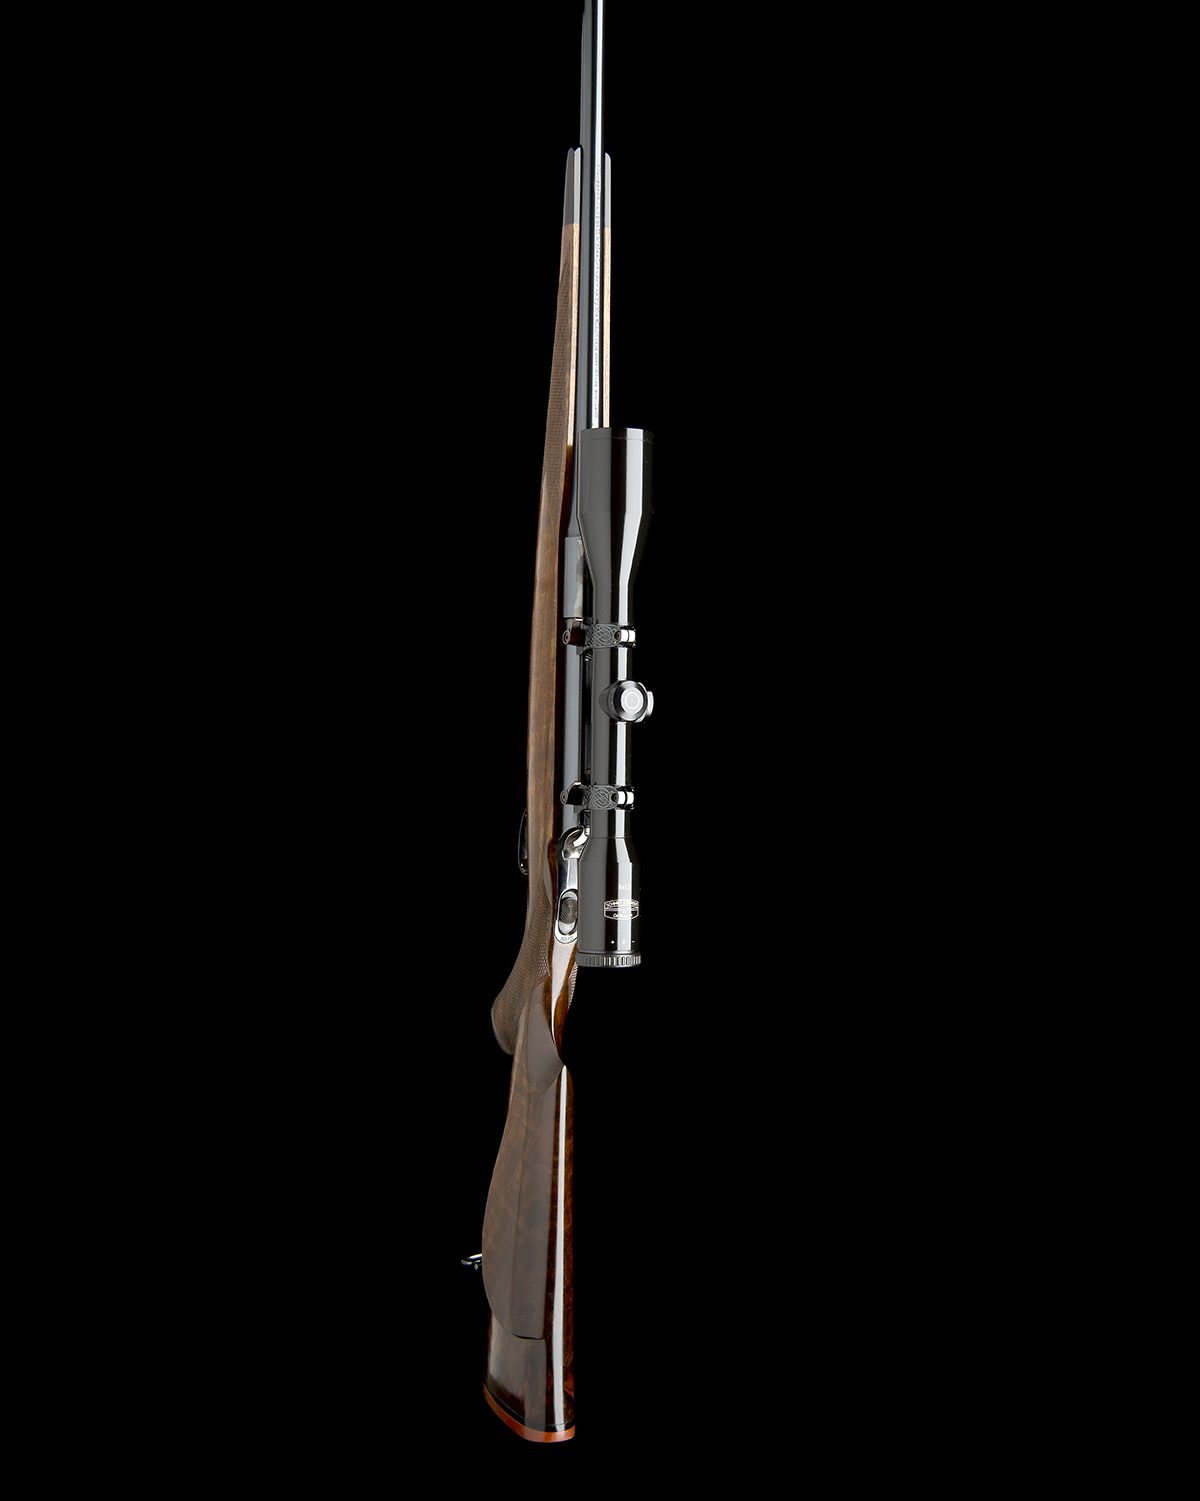 THOMPSON & CAMPBELL RIFLES LTD. A .270 WIN. BOLT-MAGAZINE SPORTING RIFLE, serial no. 98003, for - Image 8 of 16